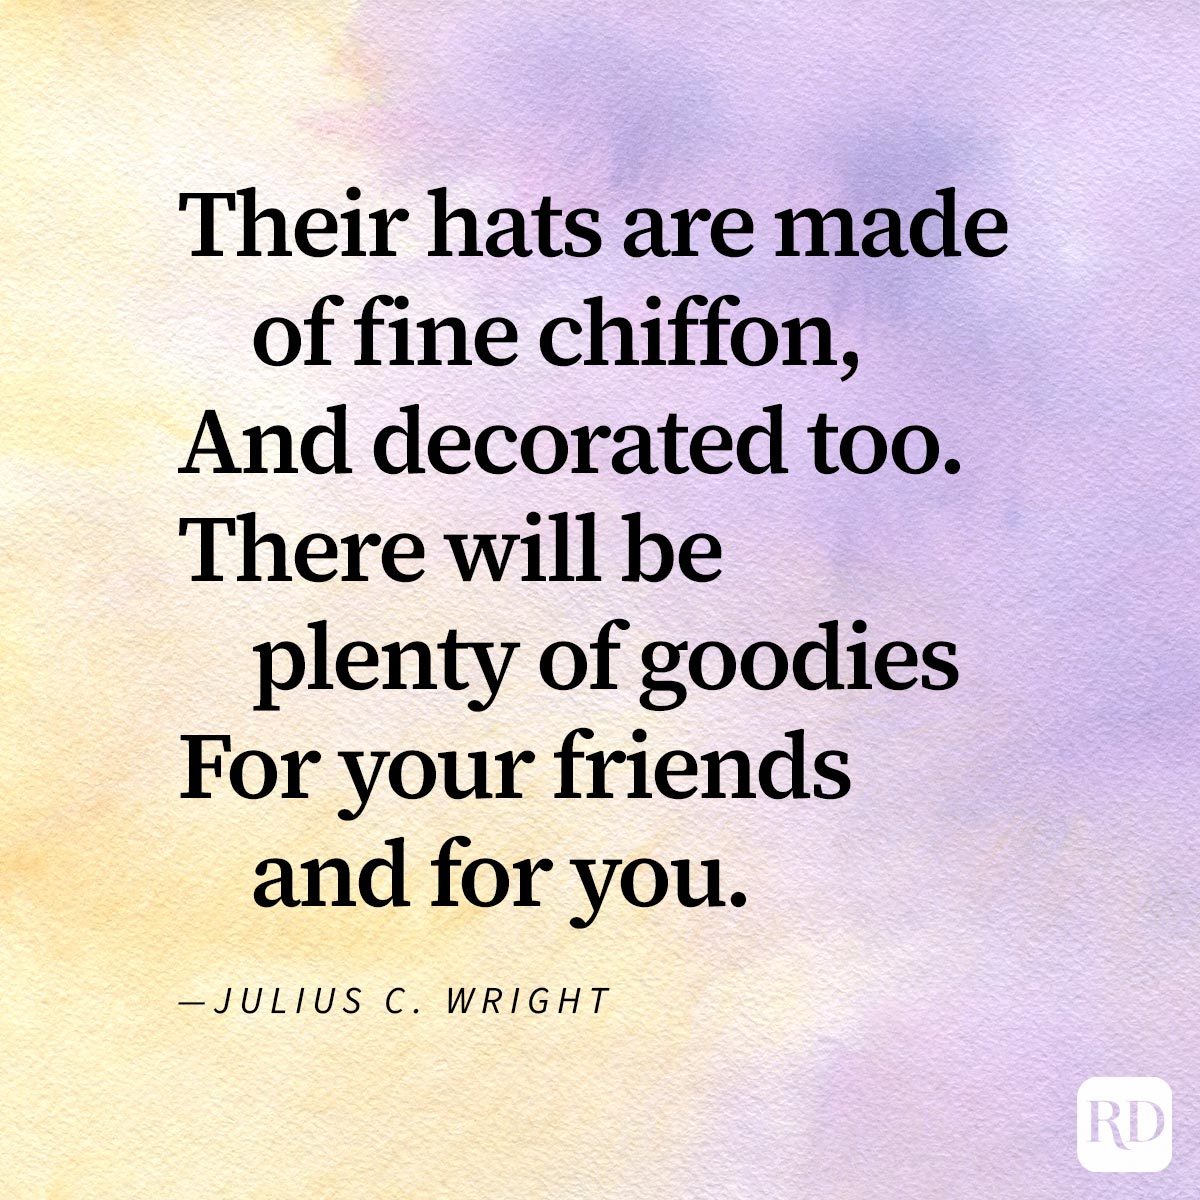 Excerpt from poem About Friendship To Share With Your BFF on watercolour background